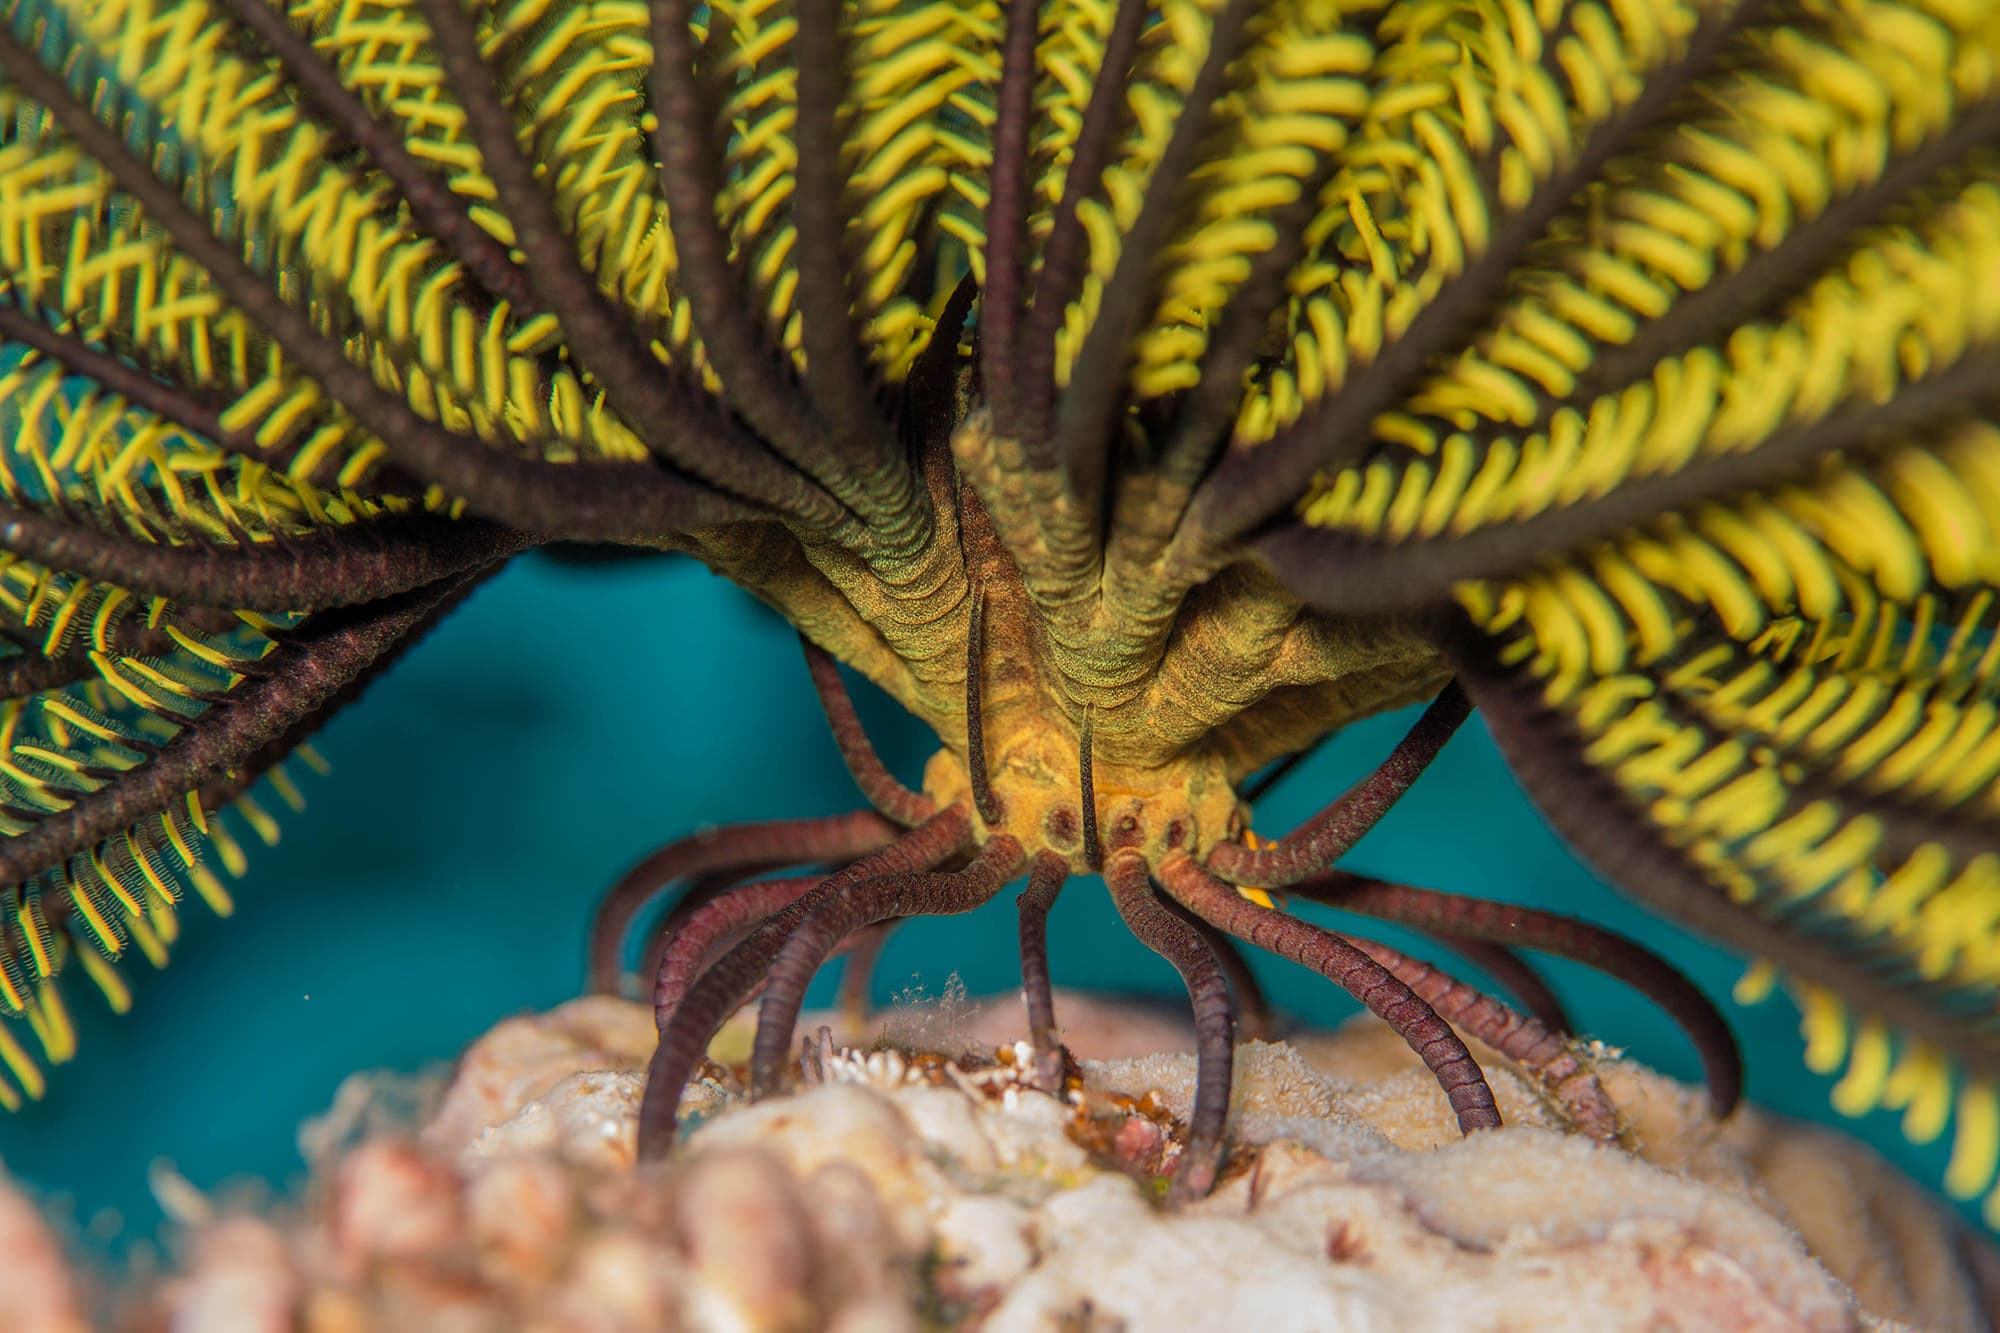 Feather star close up